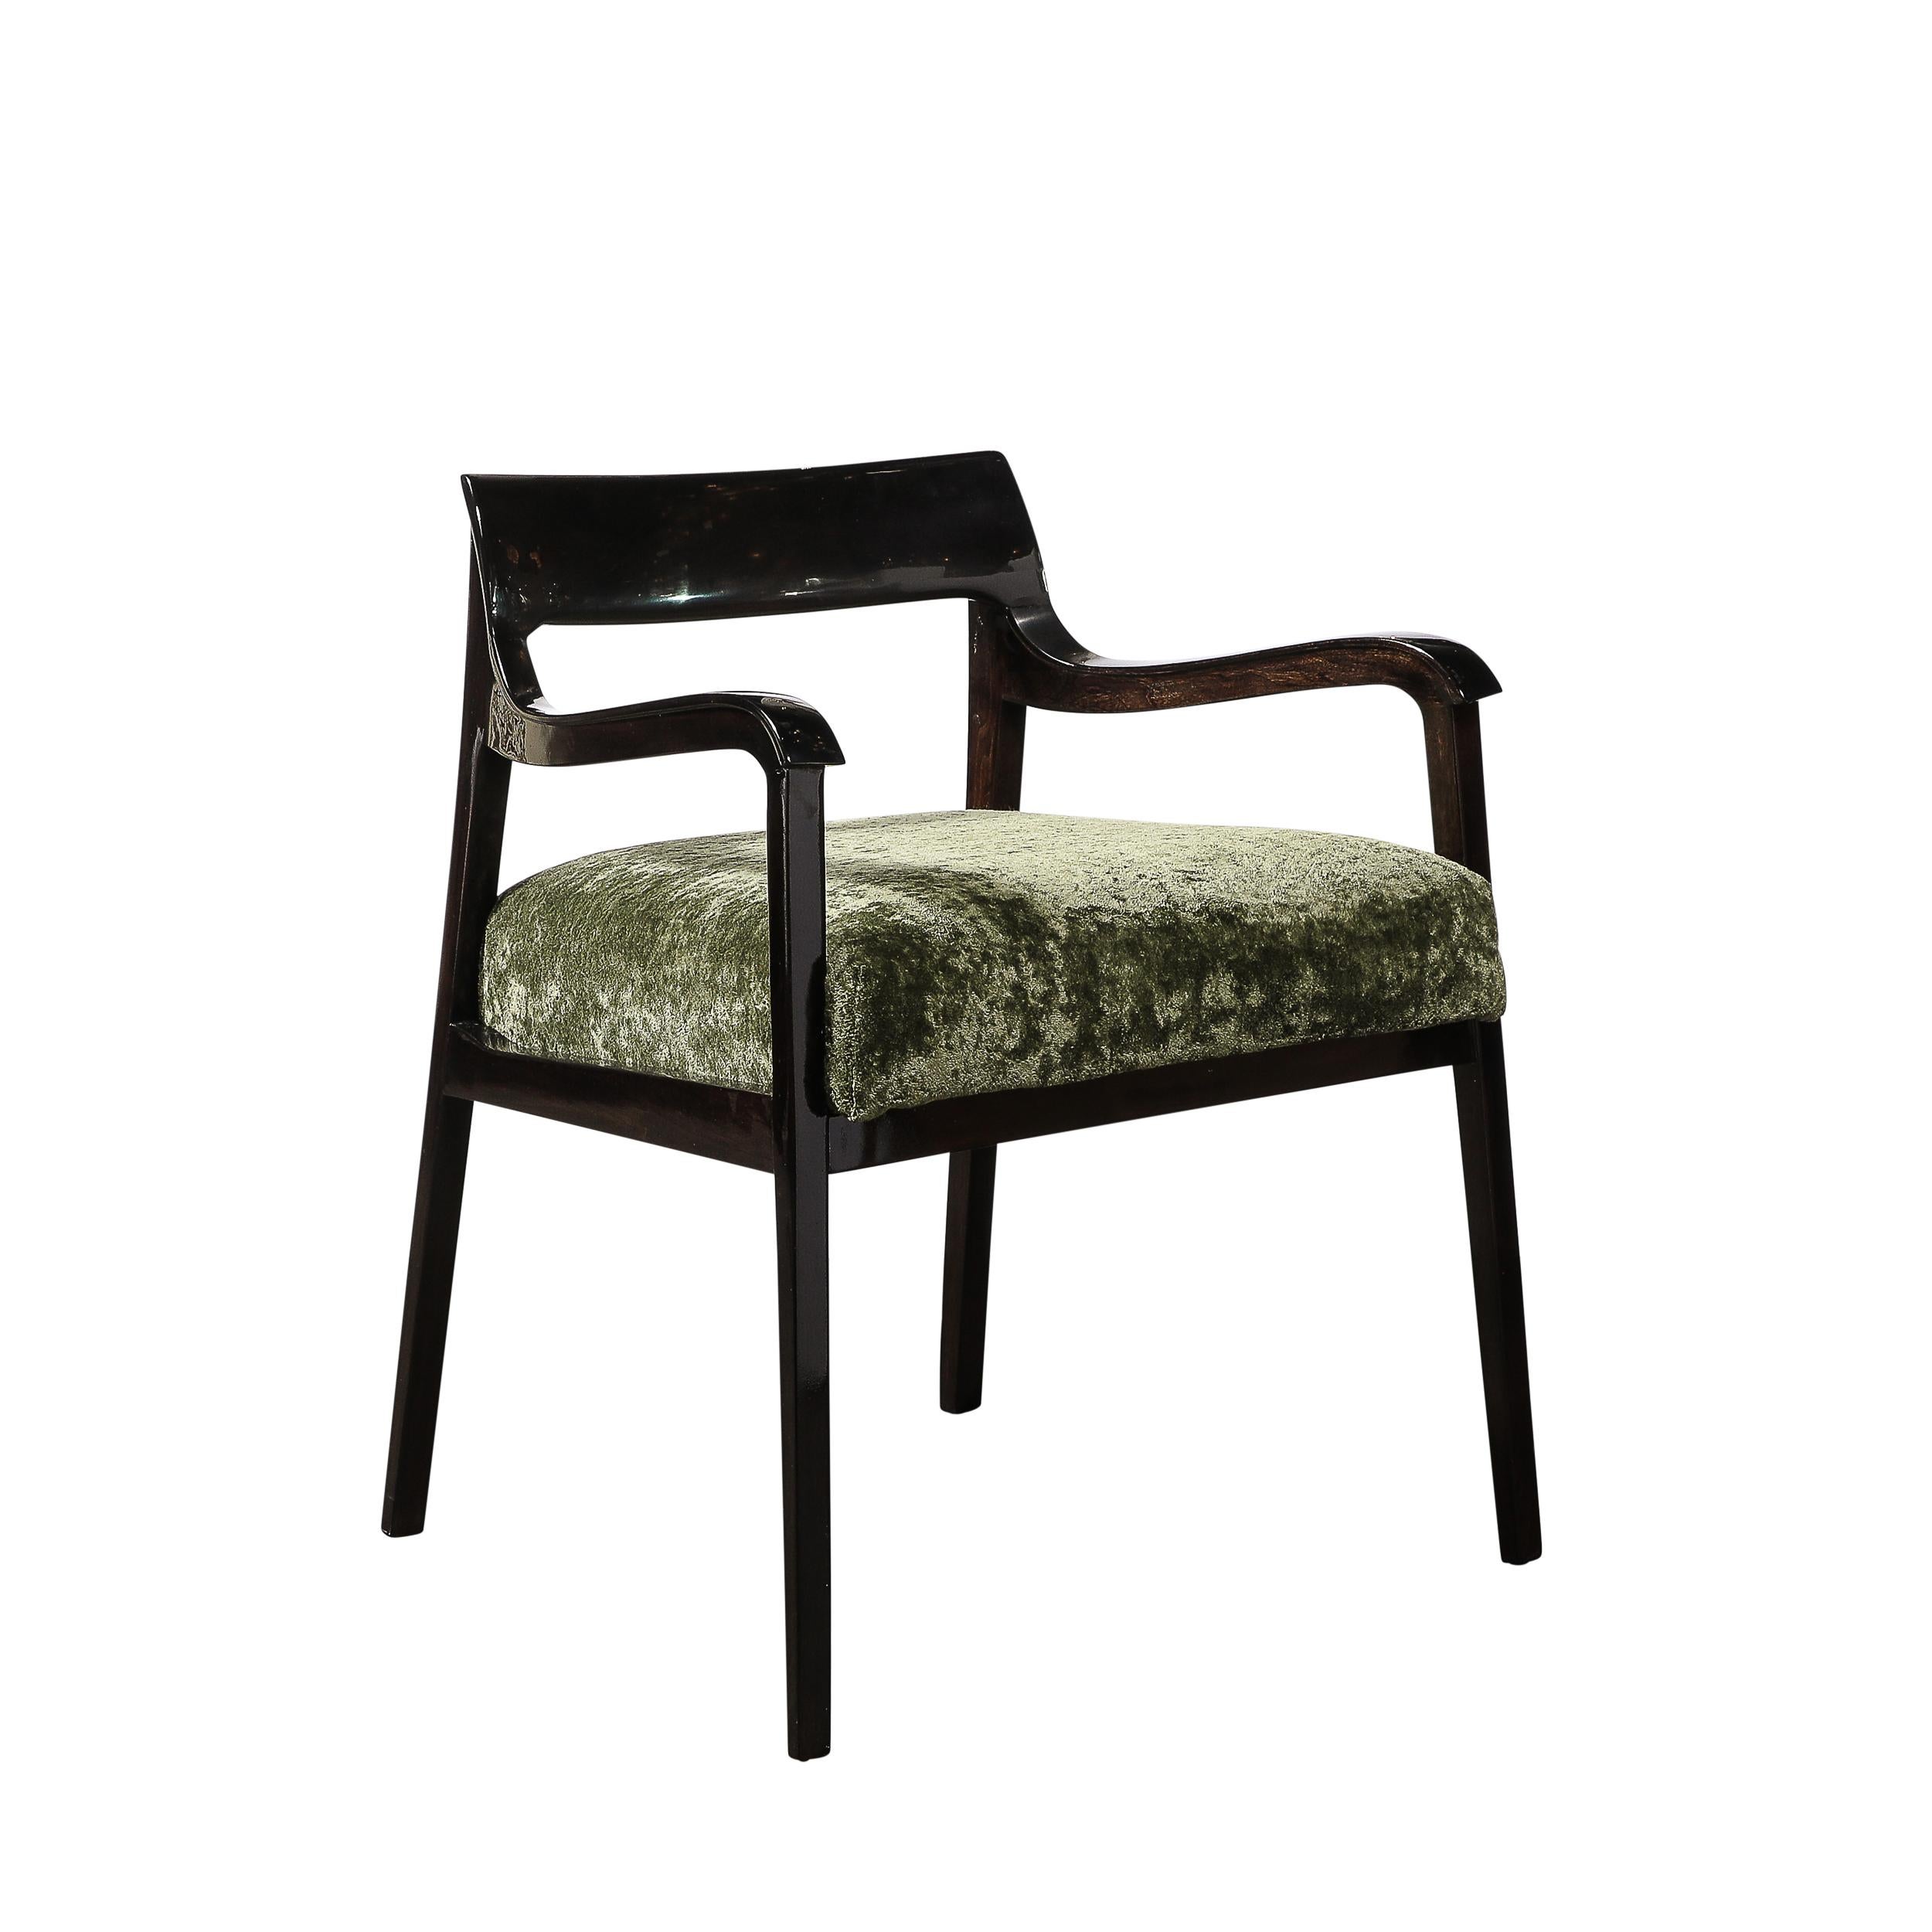 This thoughtfully formed and elegant Pair of Mid-Century Modernist Sculptural Arm Chairs in Ebonized Walnut and Holly Hunt Upholstery originate from the United States, Circa 1960. Featuring a framework rendered in ebonized walnut with a serene,